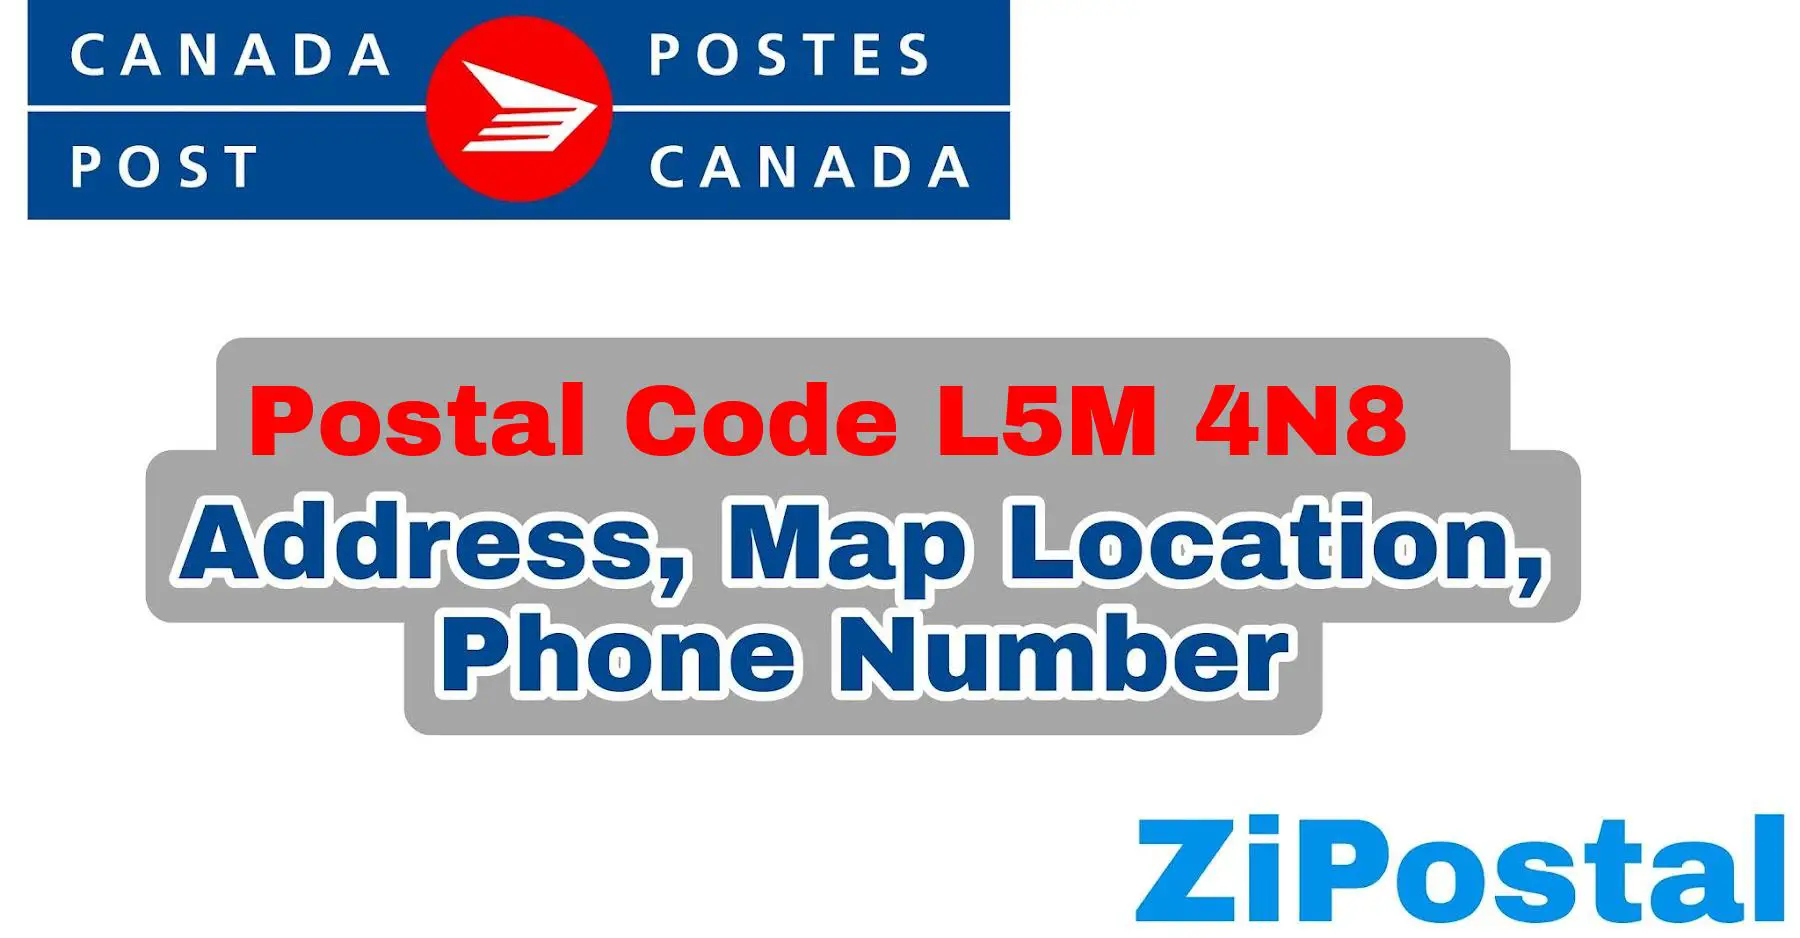 Postal Code L5M 4N8 Address Map Location and Phone Number